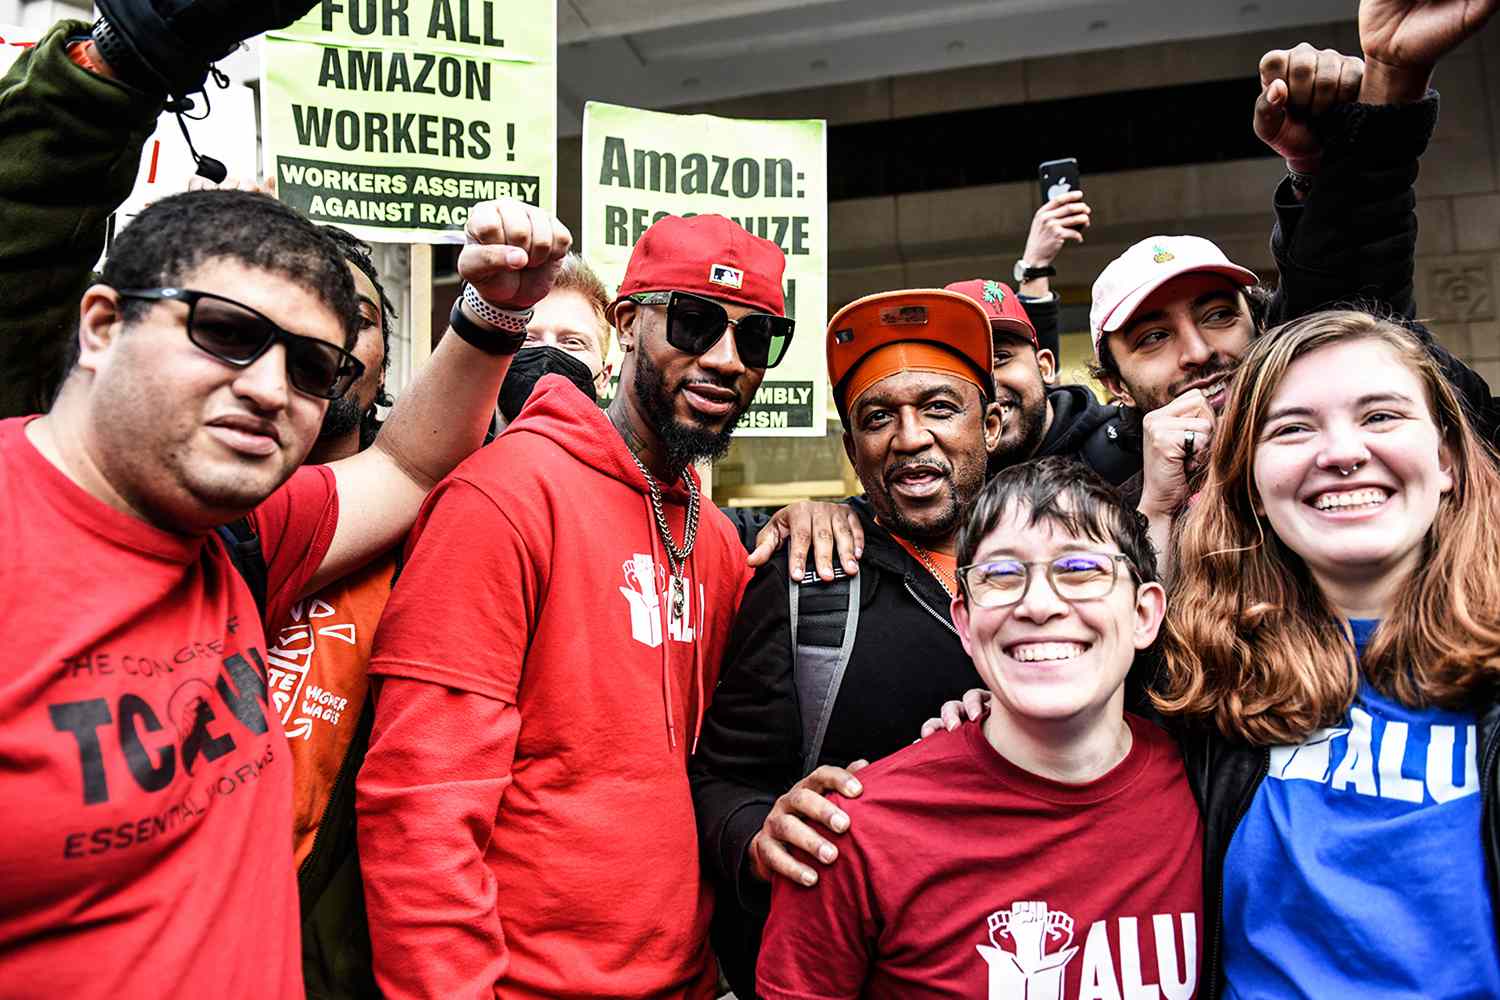 ChristianÂ Smalls, founder of the Amazon Labor Union (ALU), second left, and labor organizers celebrate outside the National Labor Relations Board offices in the Brooklyn borough of New York, U.S., on Friday, April 1, 2022.